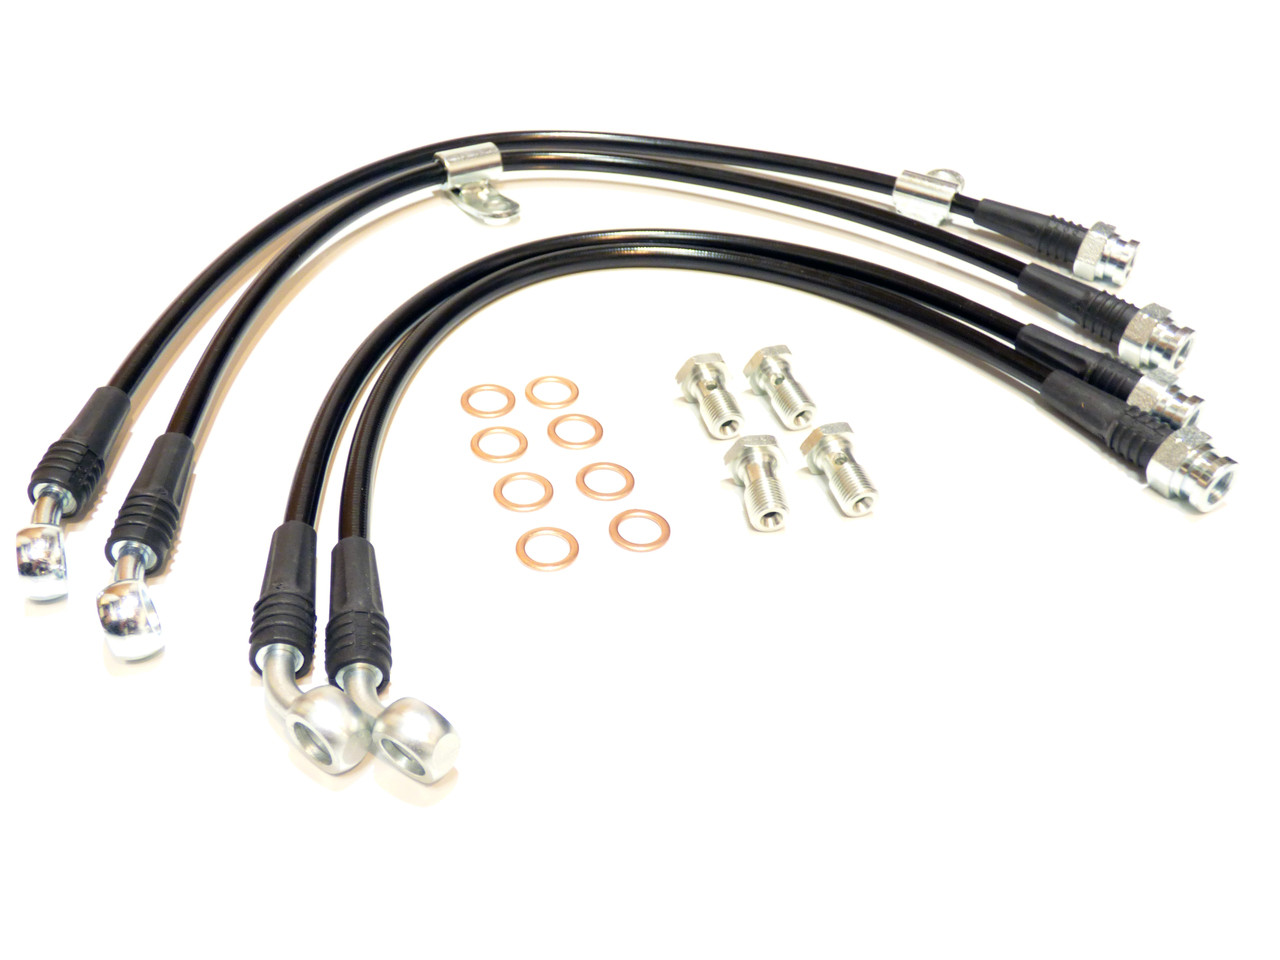 Enthuspec Performance FRONT + REAR (KIT) Stainless Steel Braided Brake  Lines for 2010-16 Genesis Coupe